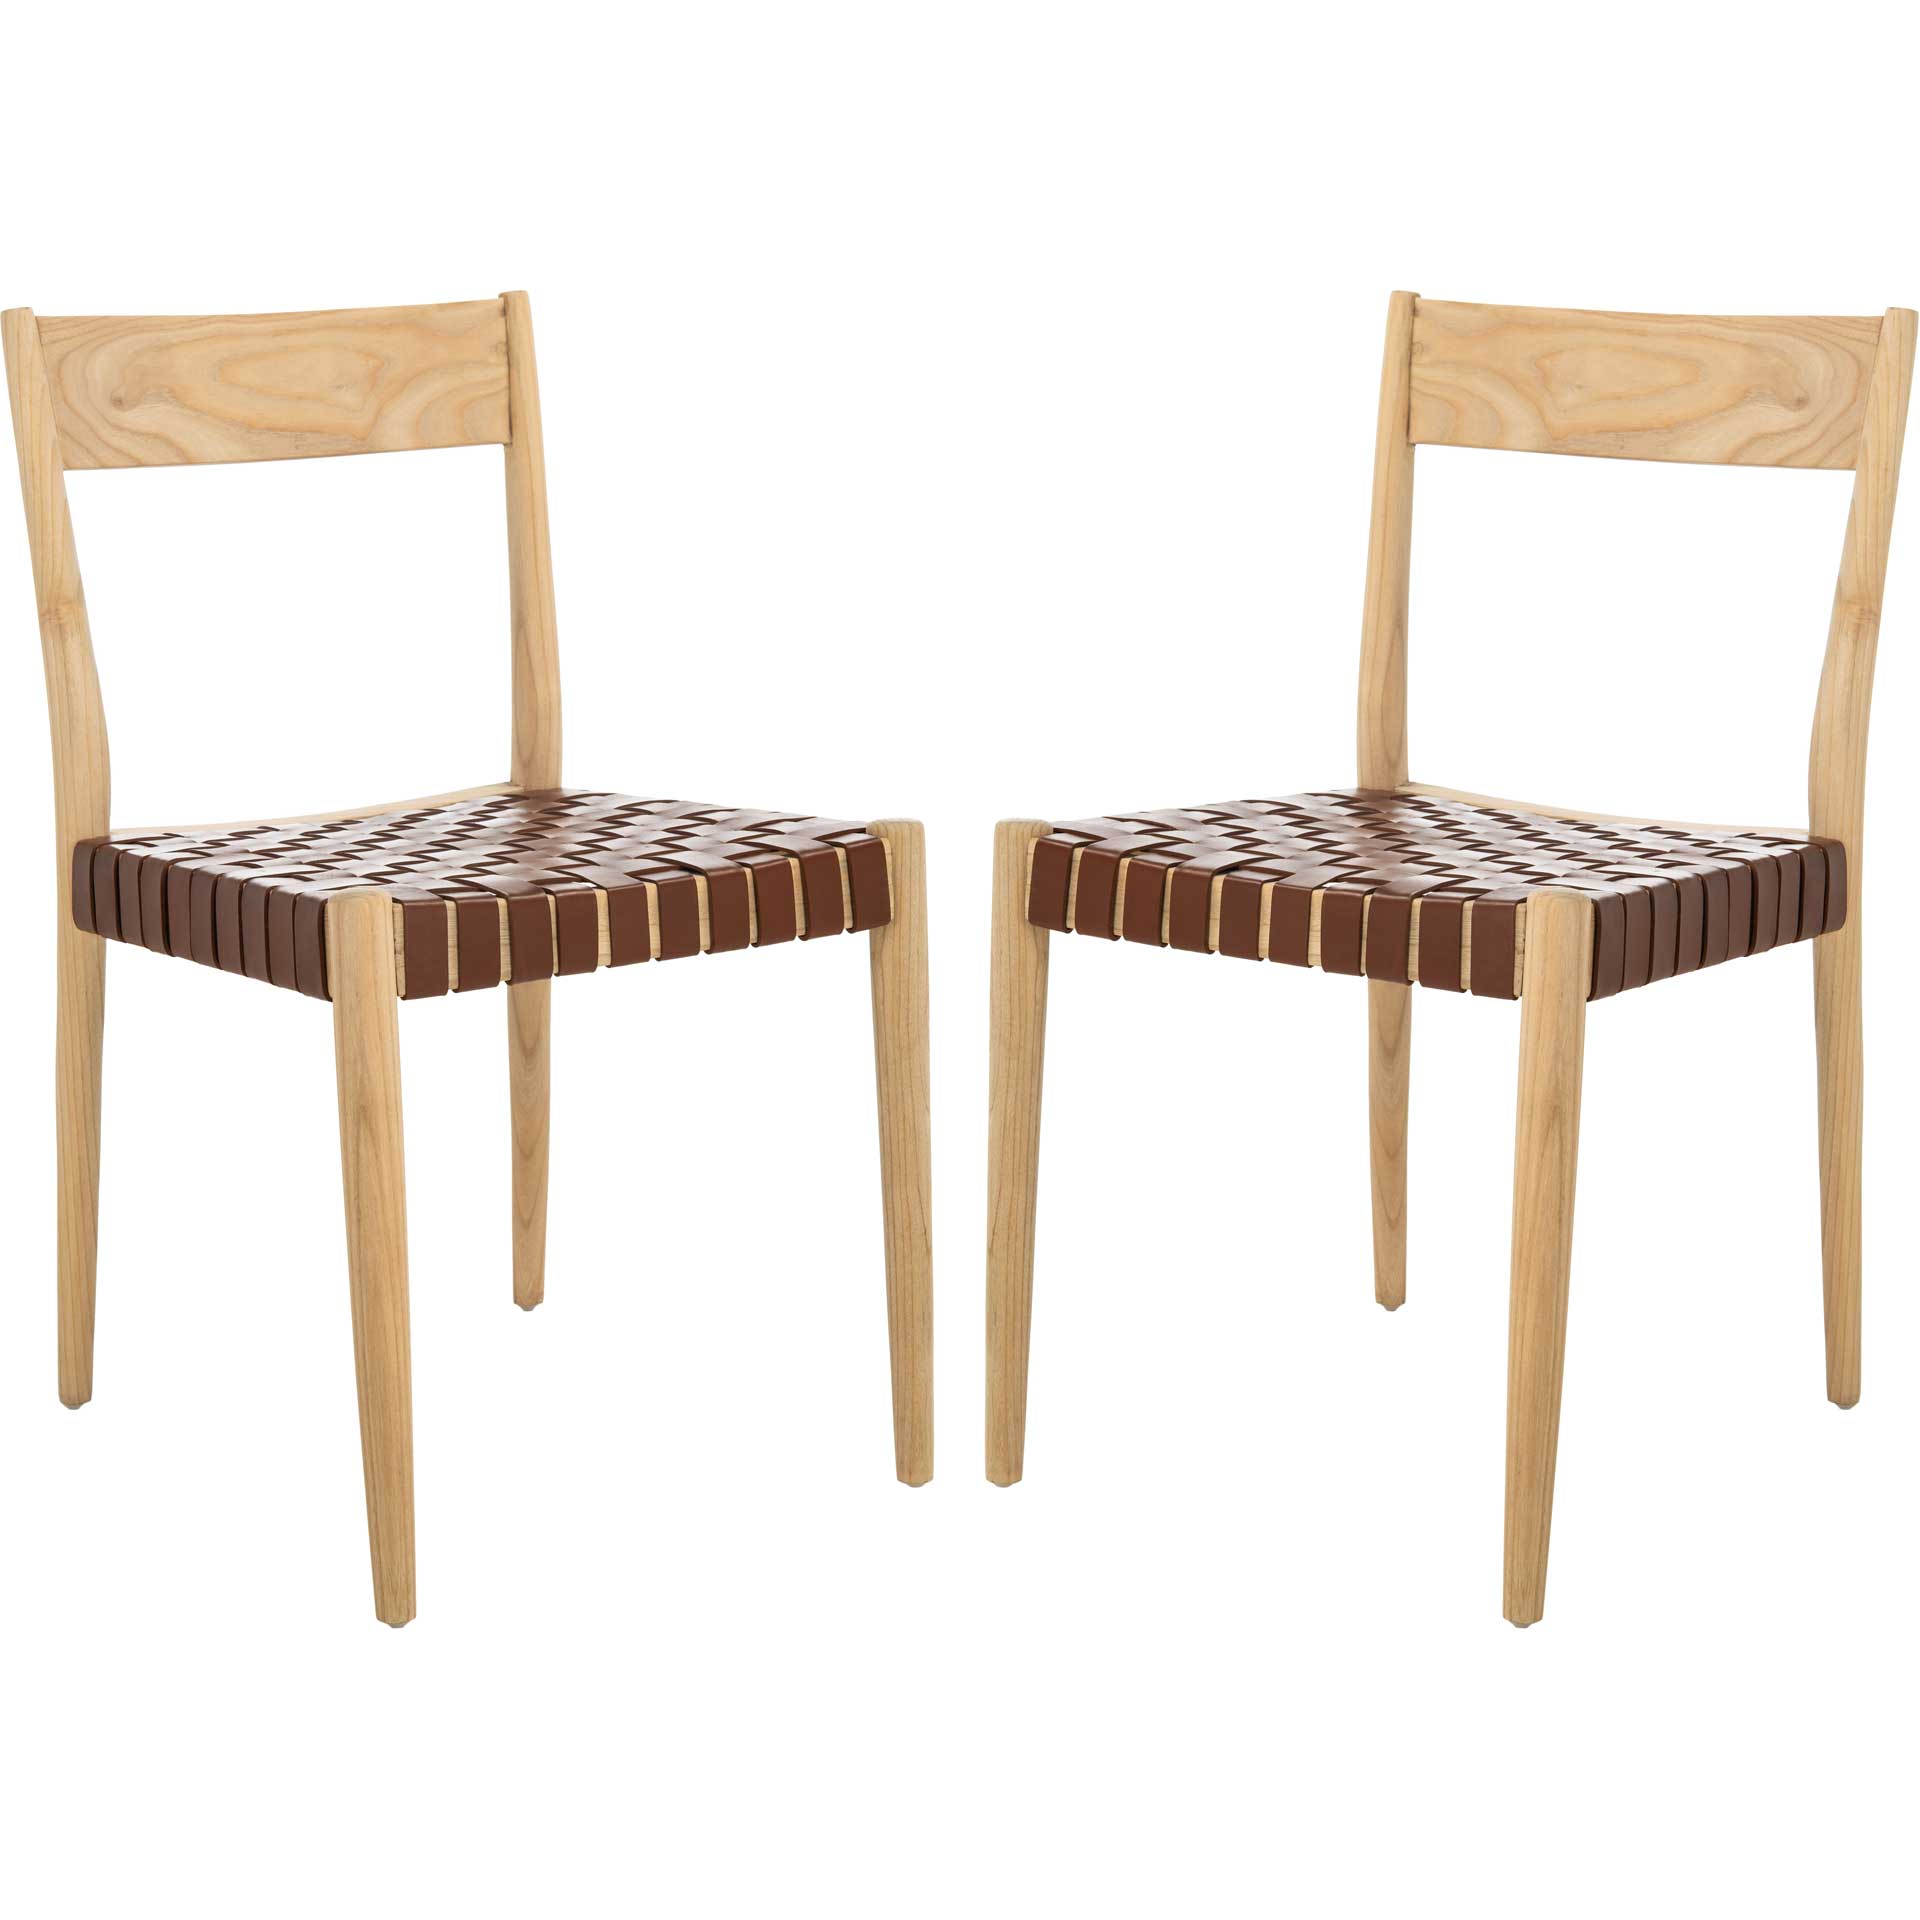 Eliza Leather Dining Chair Cognac/Natural (Set of 2)